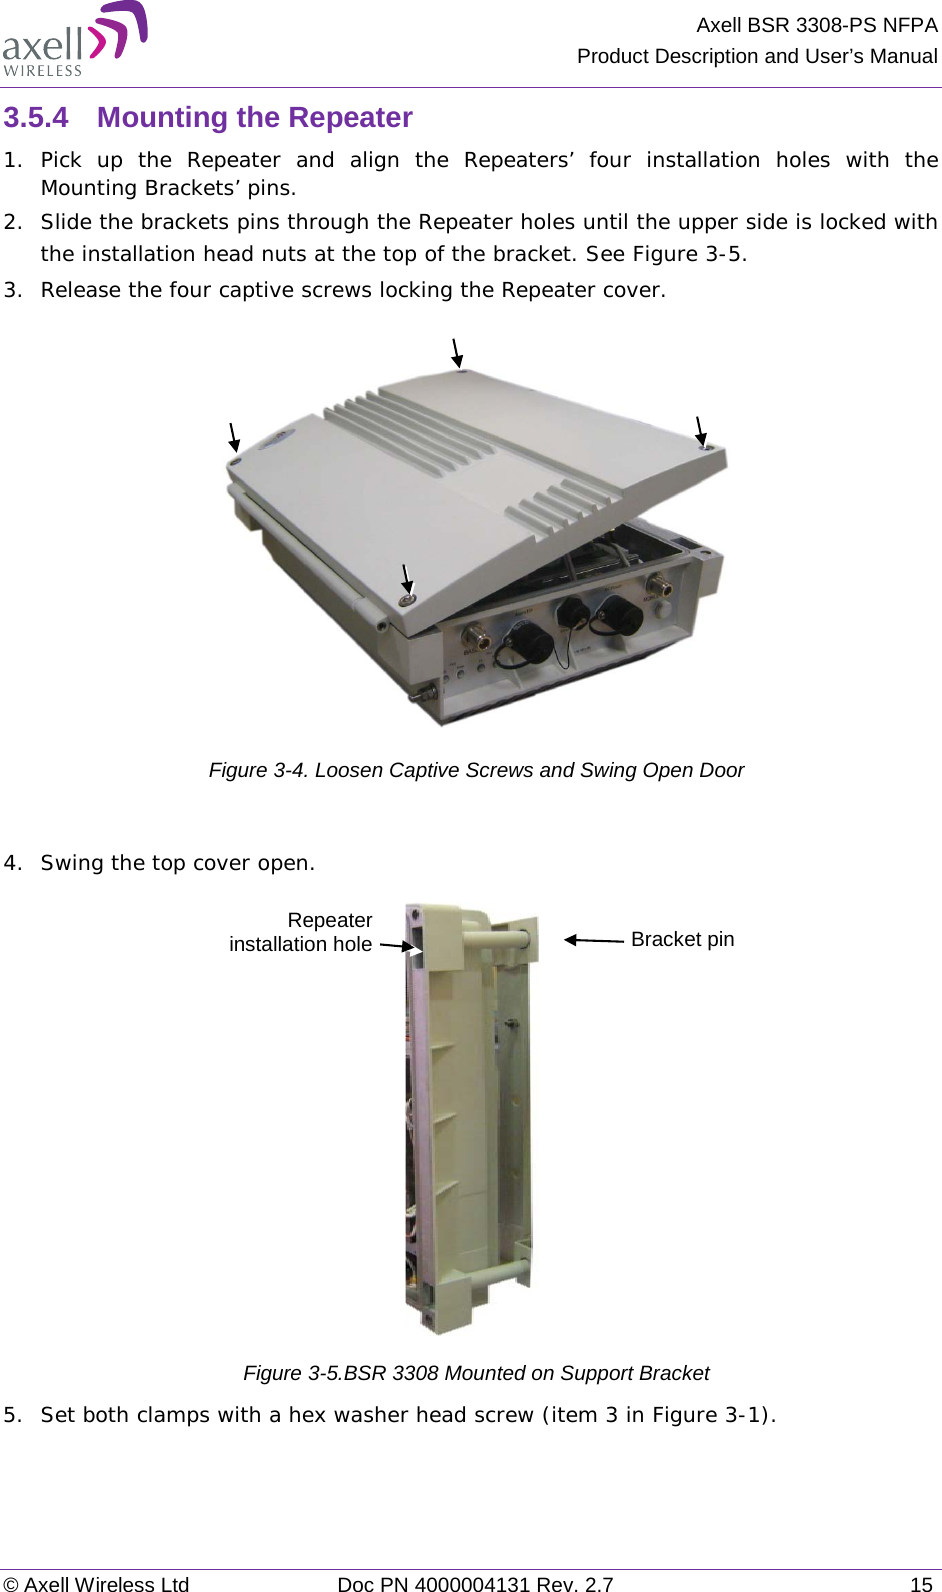 Axell BSR 3308-PS NFPA Product Description and User’s Manual © Axell Wireless Ltd Doc PN 4000004131 Rev. 2.7 15 3.5.4  Mounting the Repeater 1.  Pick up the Repeater and align the Repeaters’ four installation holes with the Mounting Brackets’ pins. 2.  Slide the brackets pins through the Repeater holes until the upper side is locked with the installation head nuts at the top of the bracket. See Figure  3-5. 3.  Release the four captive screws locking the Repeater cover.   Figure  3-4. Loosen Captive Screws and Swing Open Door  4.  Swing the top cover open.  Figure  3-5.BSR 3308 Mounted on Support Bracket 5.  Set both clamps with a hex washer head screw (item 3 in Figure  3-1). Bracket pin Repeater installation hole  